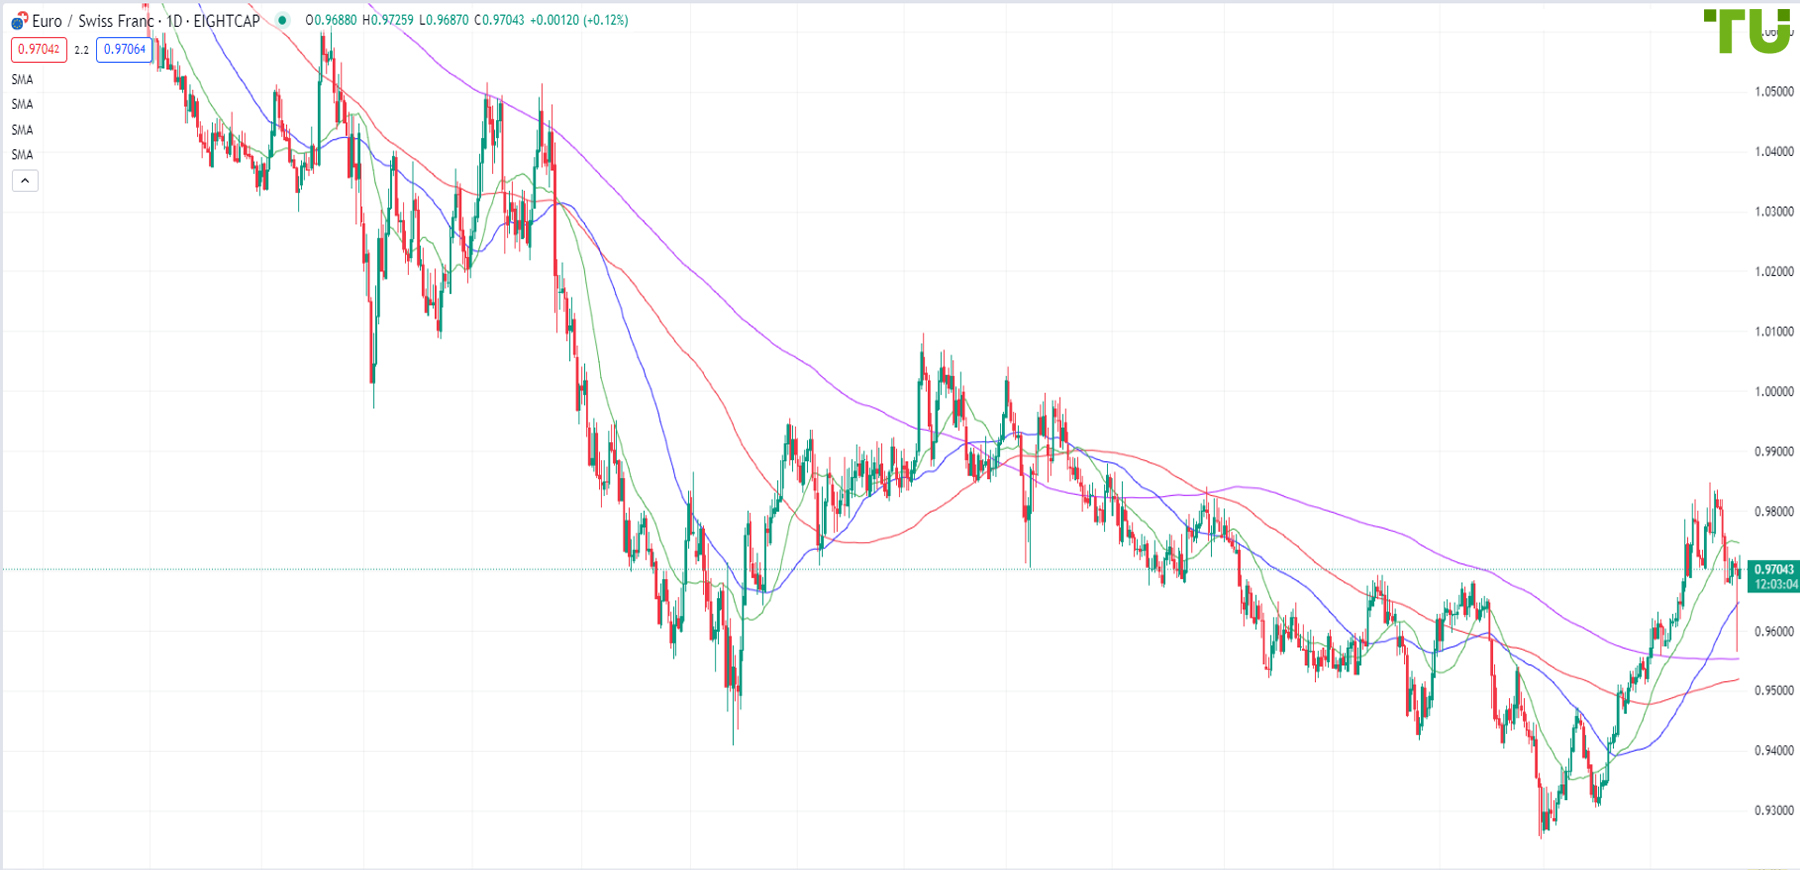 EUR/CHF is trying to break 0.9720 resistance